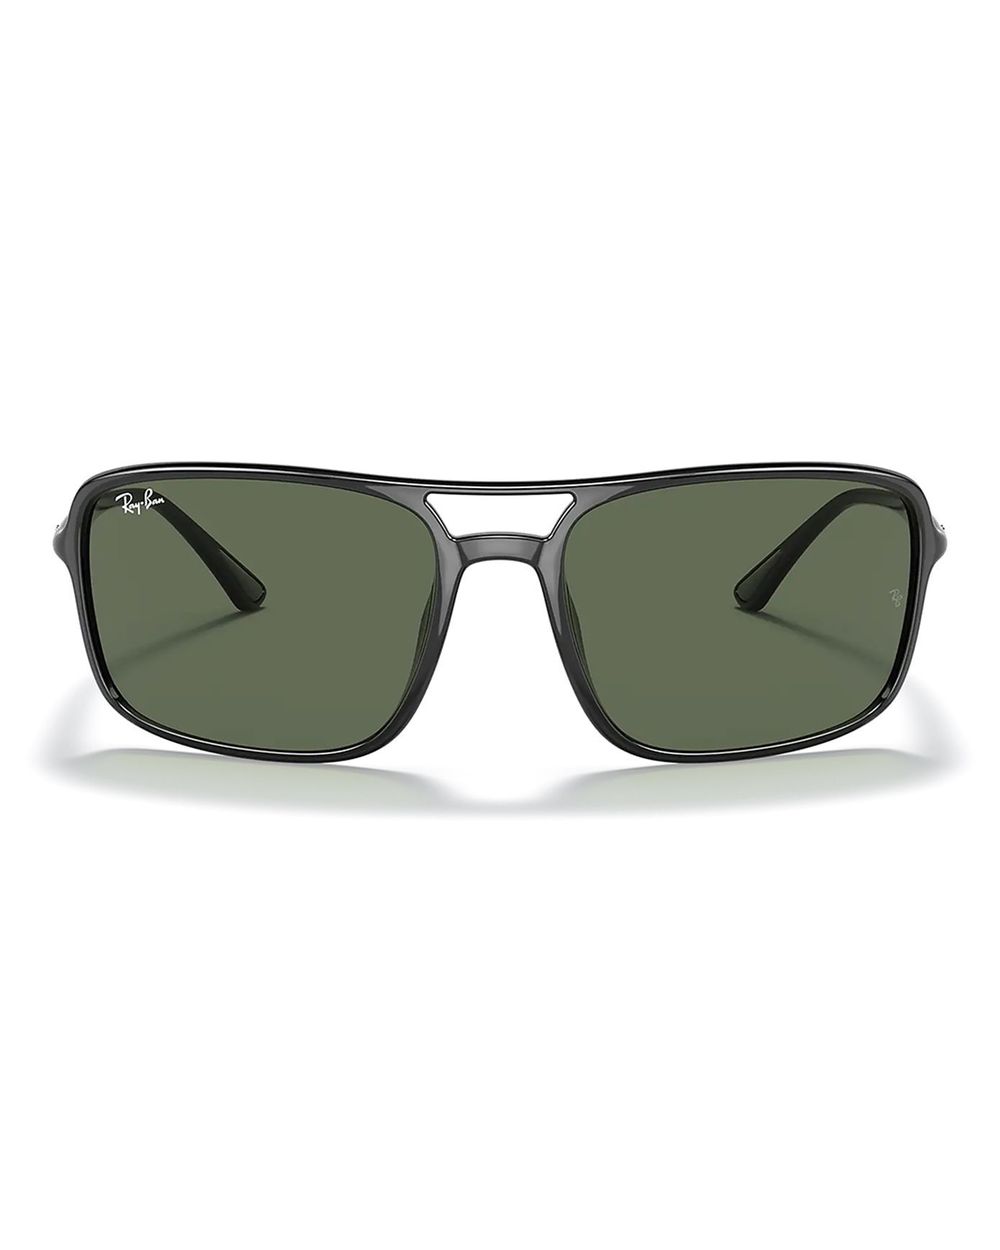 Ray-Ban Unisex Green Rectangle Sunglasses RB4375 601/71 60-18 | Buy Ray ...